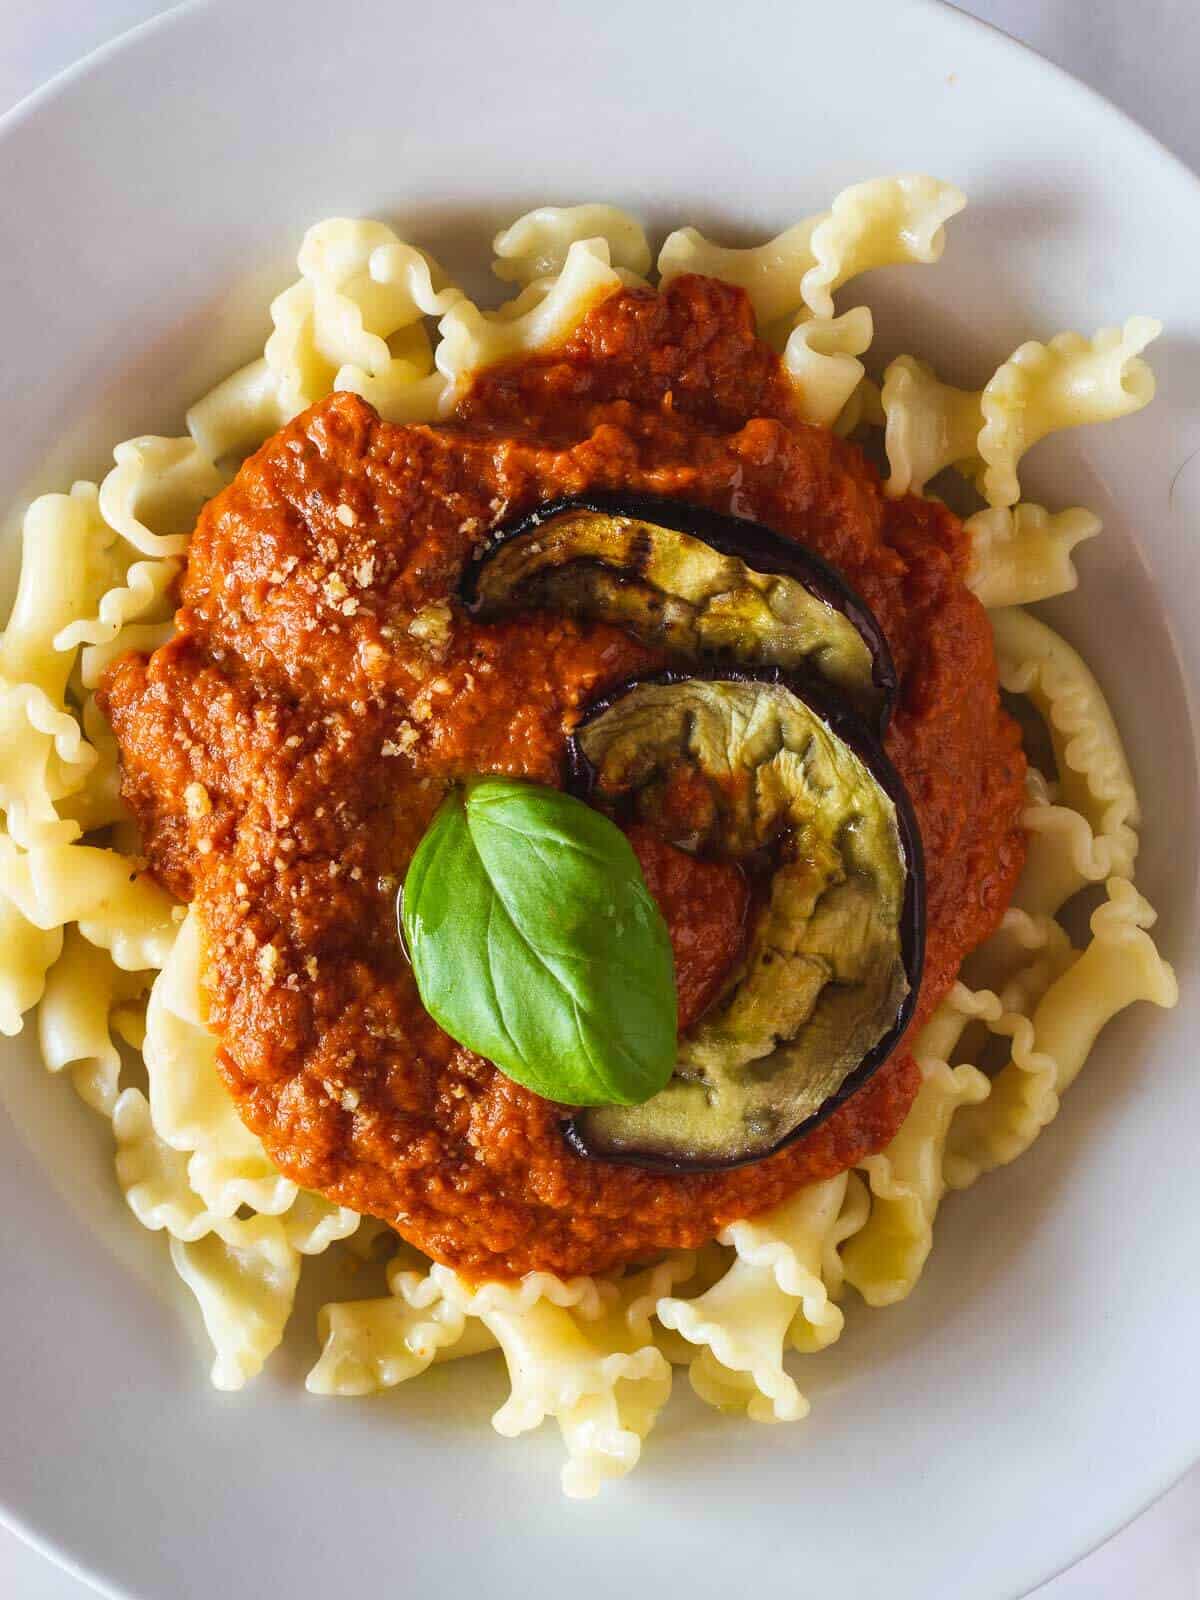 plate served with plain curly pasta and creamy tomato ricotta sauce on top and garnished with grilled eggplant slices and basil leave.